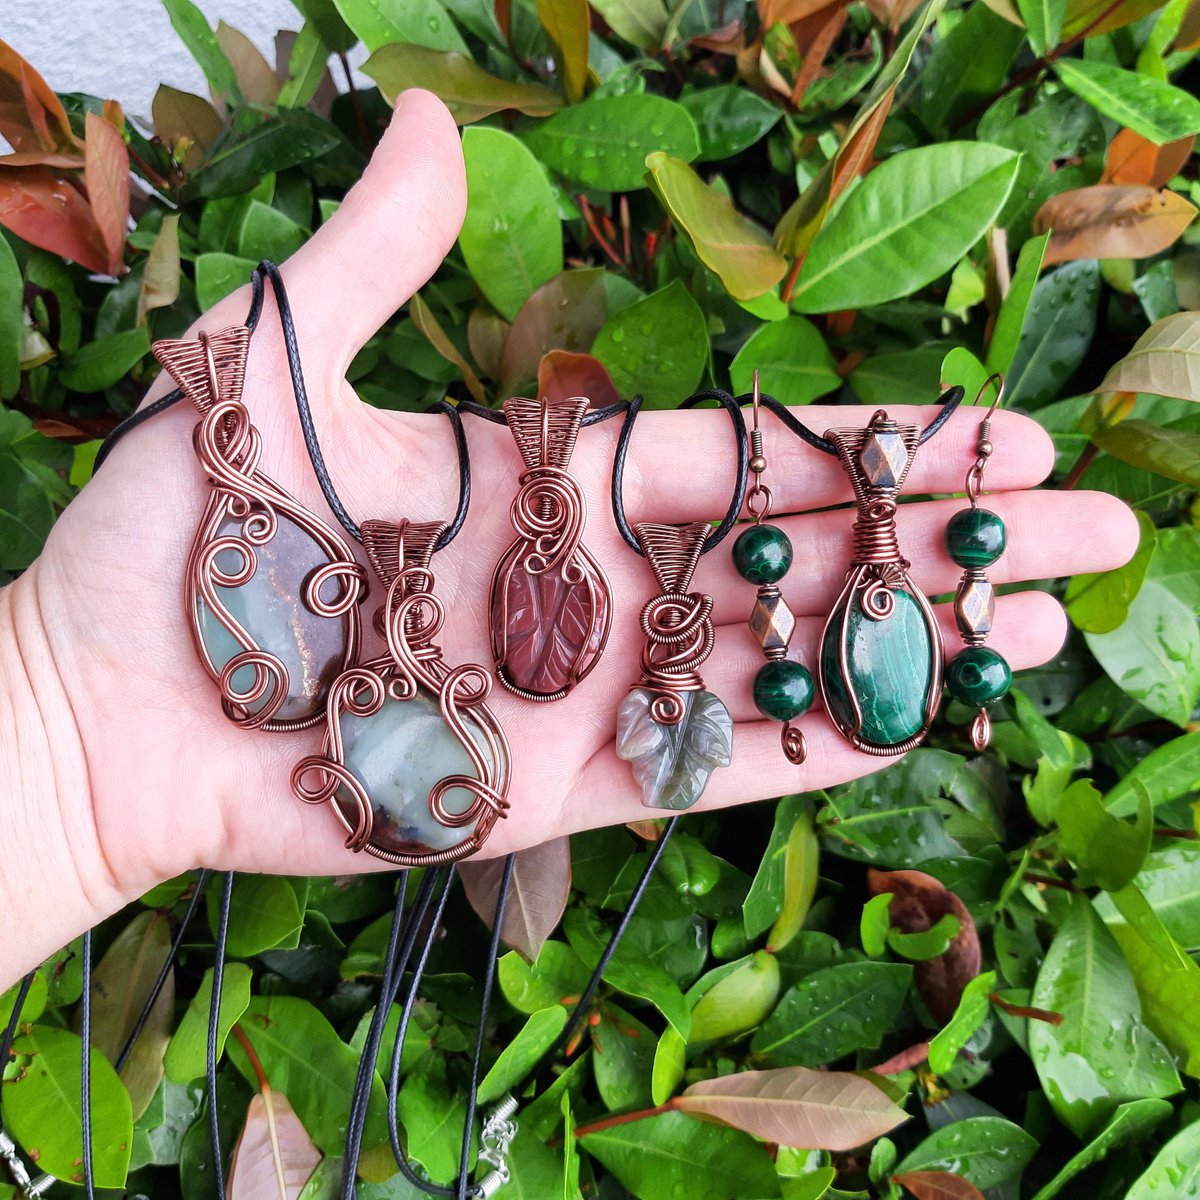 I finished up the last few pendants and earrings for my fall/halloween themed shop update. Available September 1st 